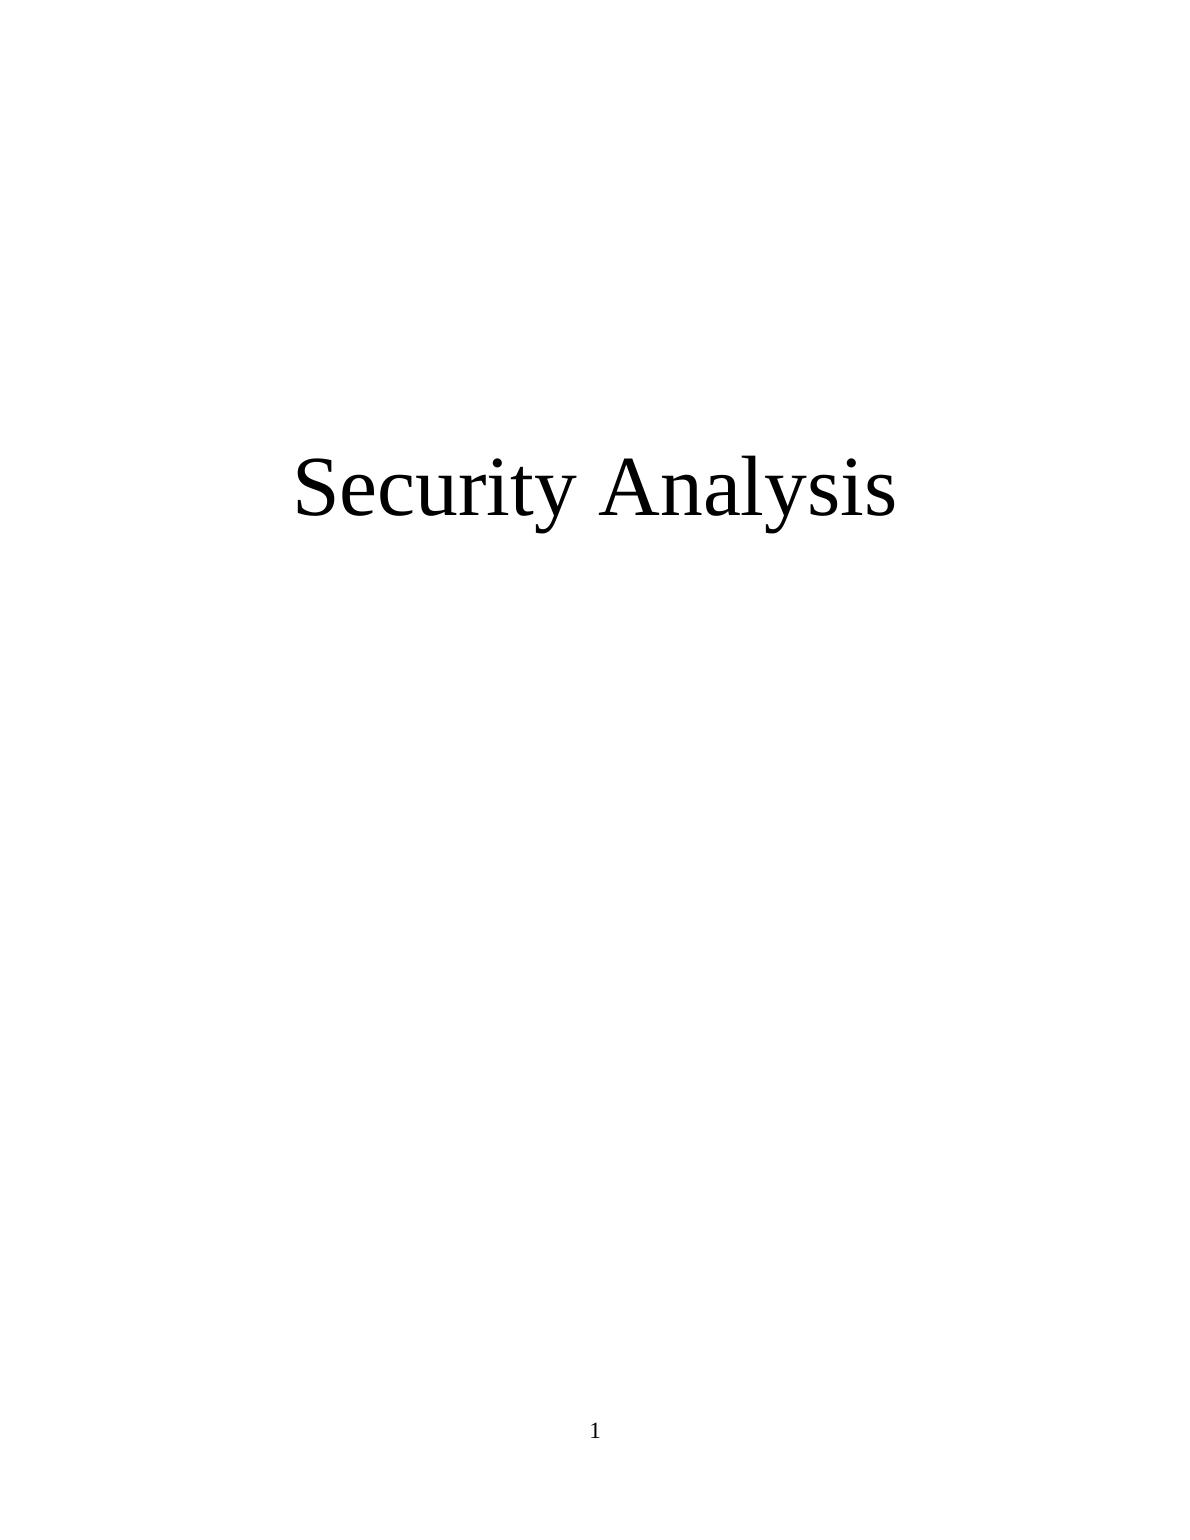 Security Analysis: Evaluating the Value of Tesco Stock_1